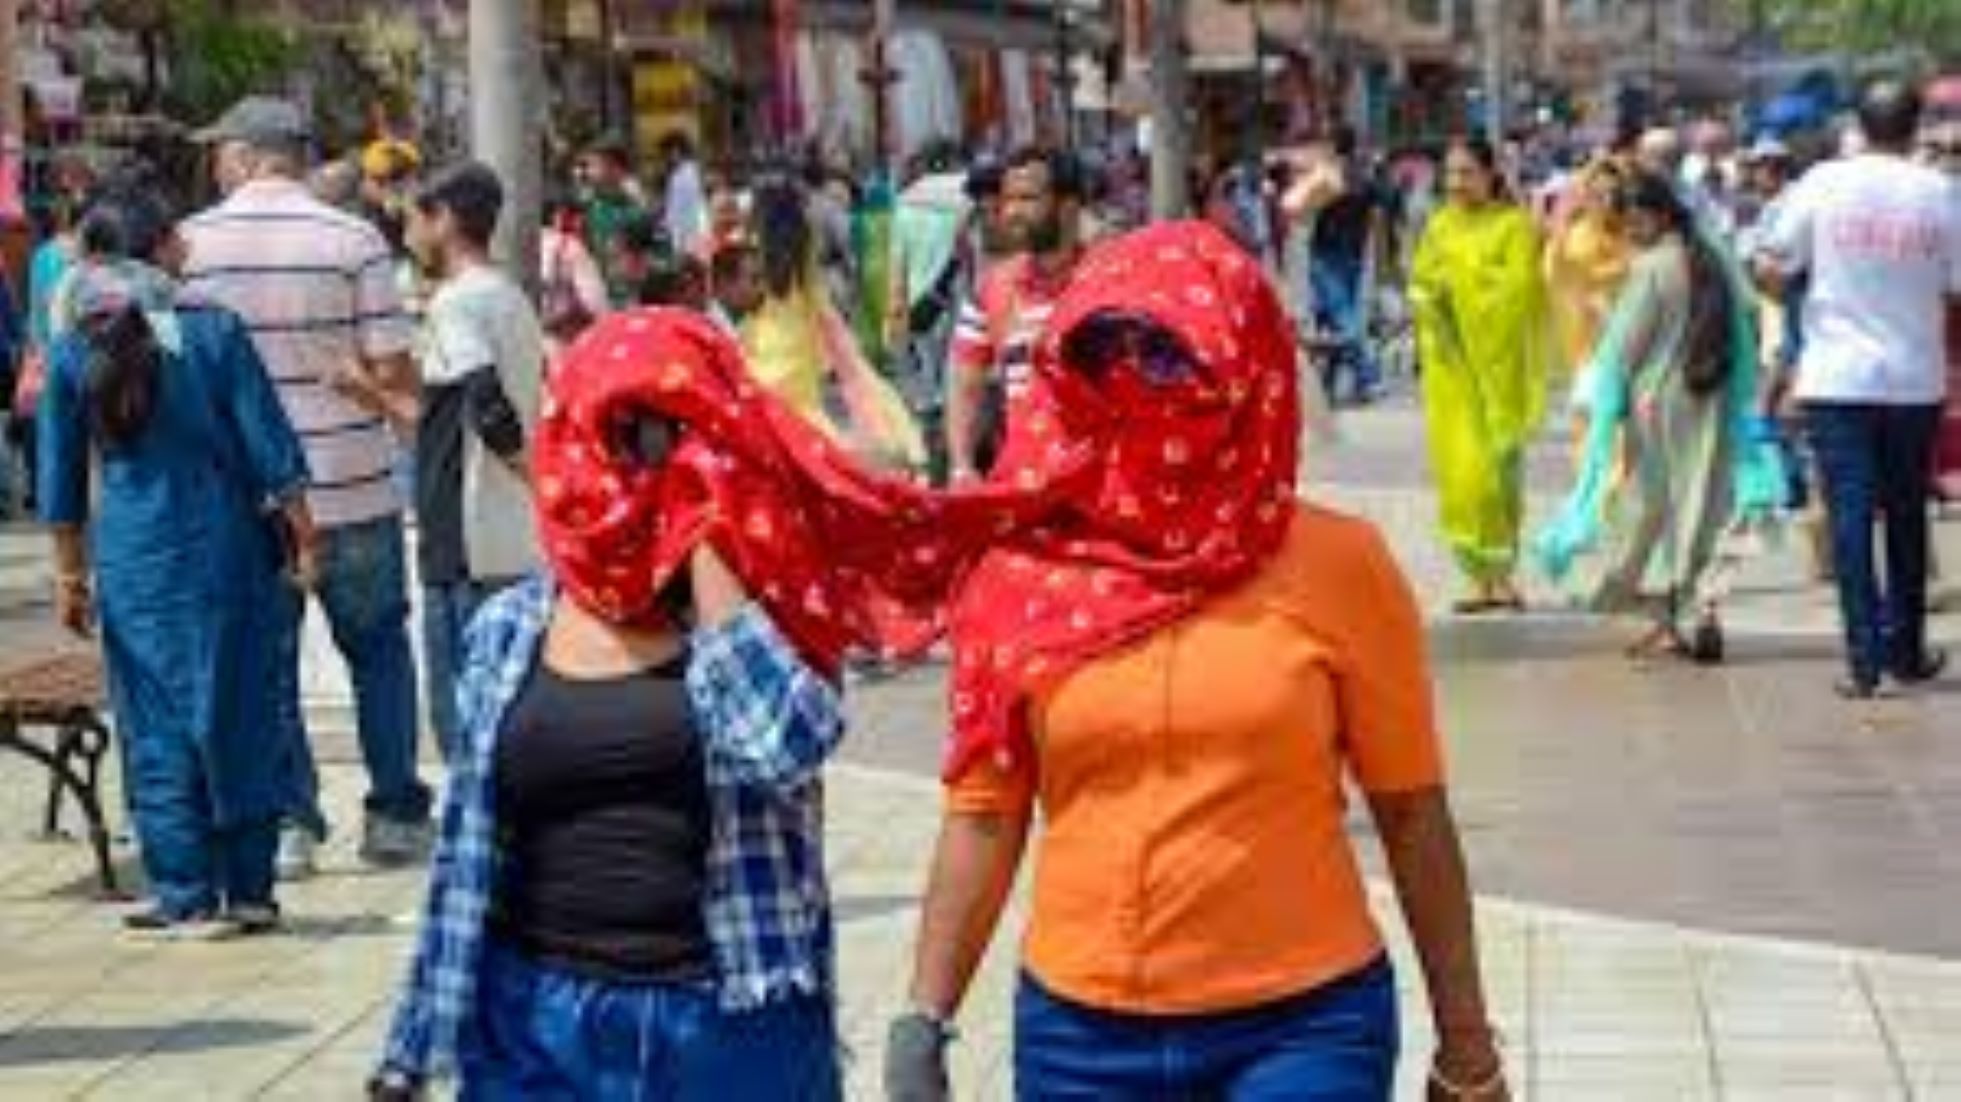 Severe Heat Wave Likely To Continue Over Parts Of India: Meteorological Department